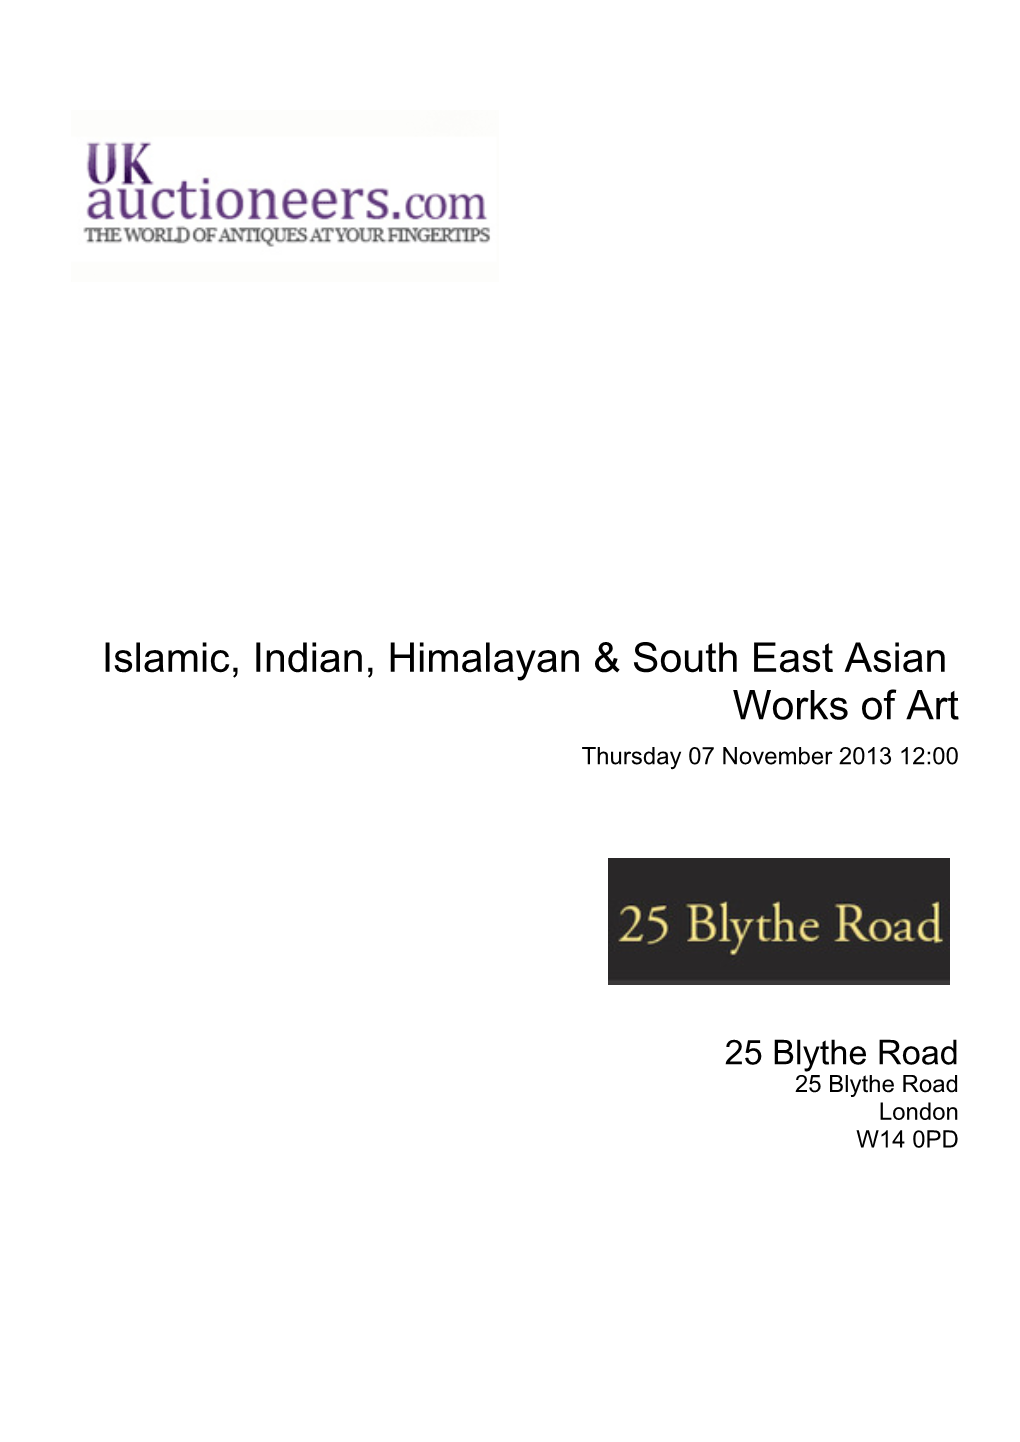 Islamic, Indian, Himalayan & South East Asian Works Of